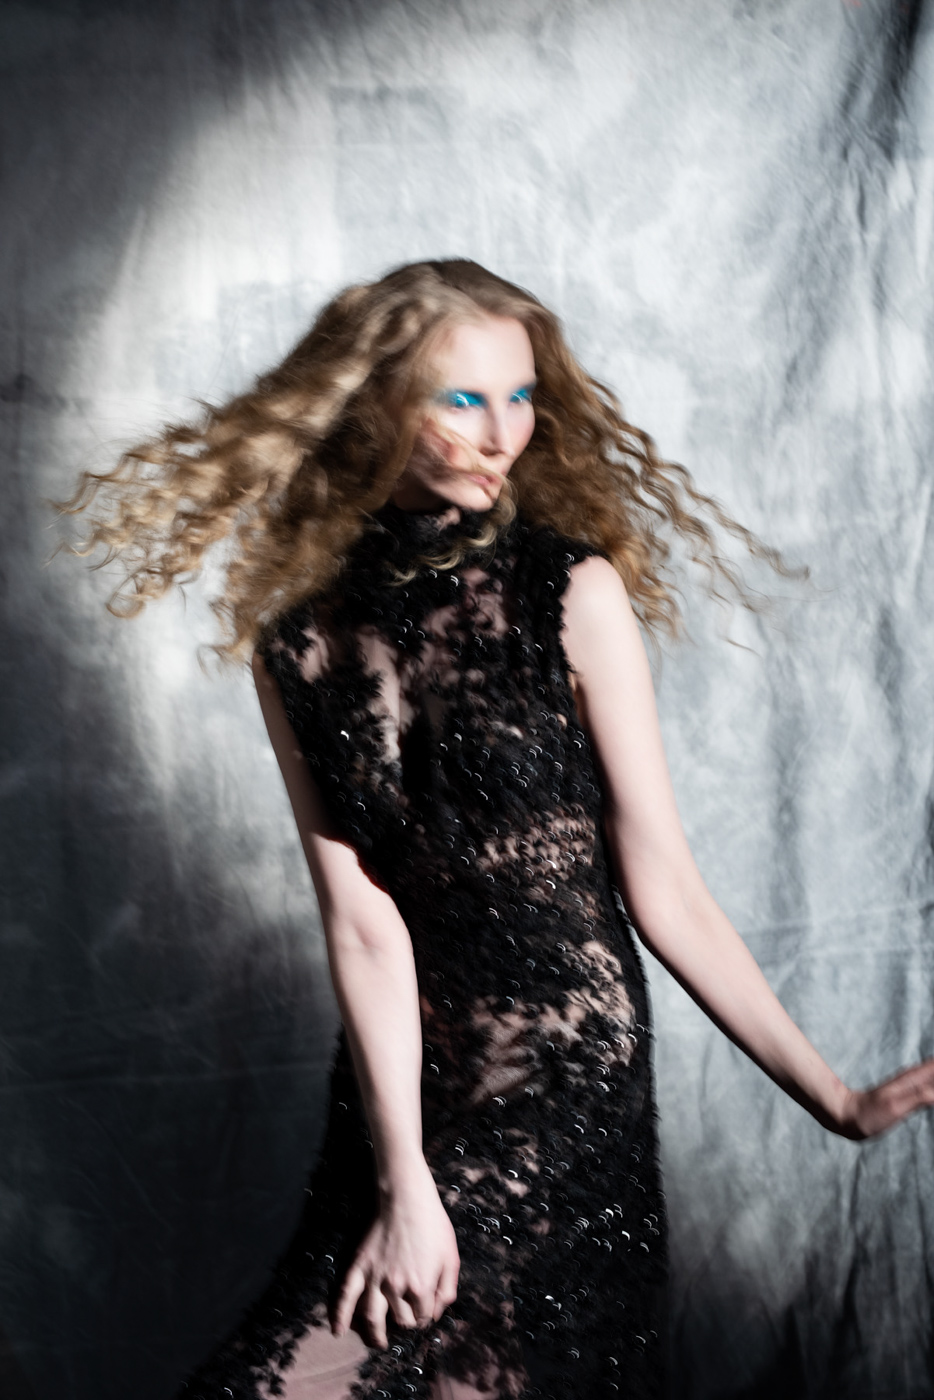 Dramatic_fashion_editorial_portrait_of_woman_with_curly_hair_wearing_black_lace_dress_on_grey_background_photographed_by_Sara_Lehtomaa